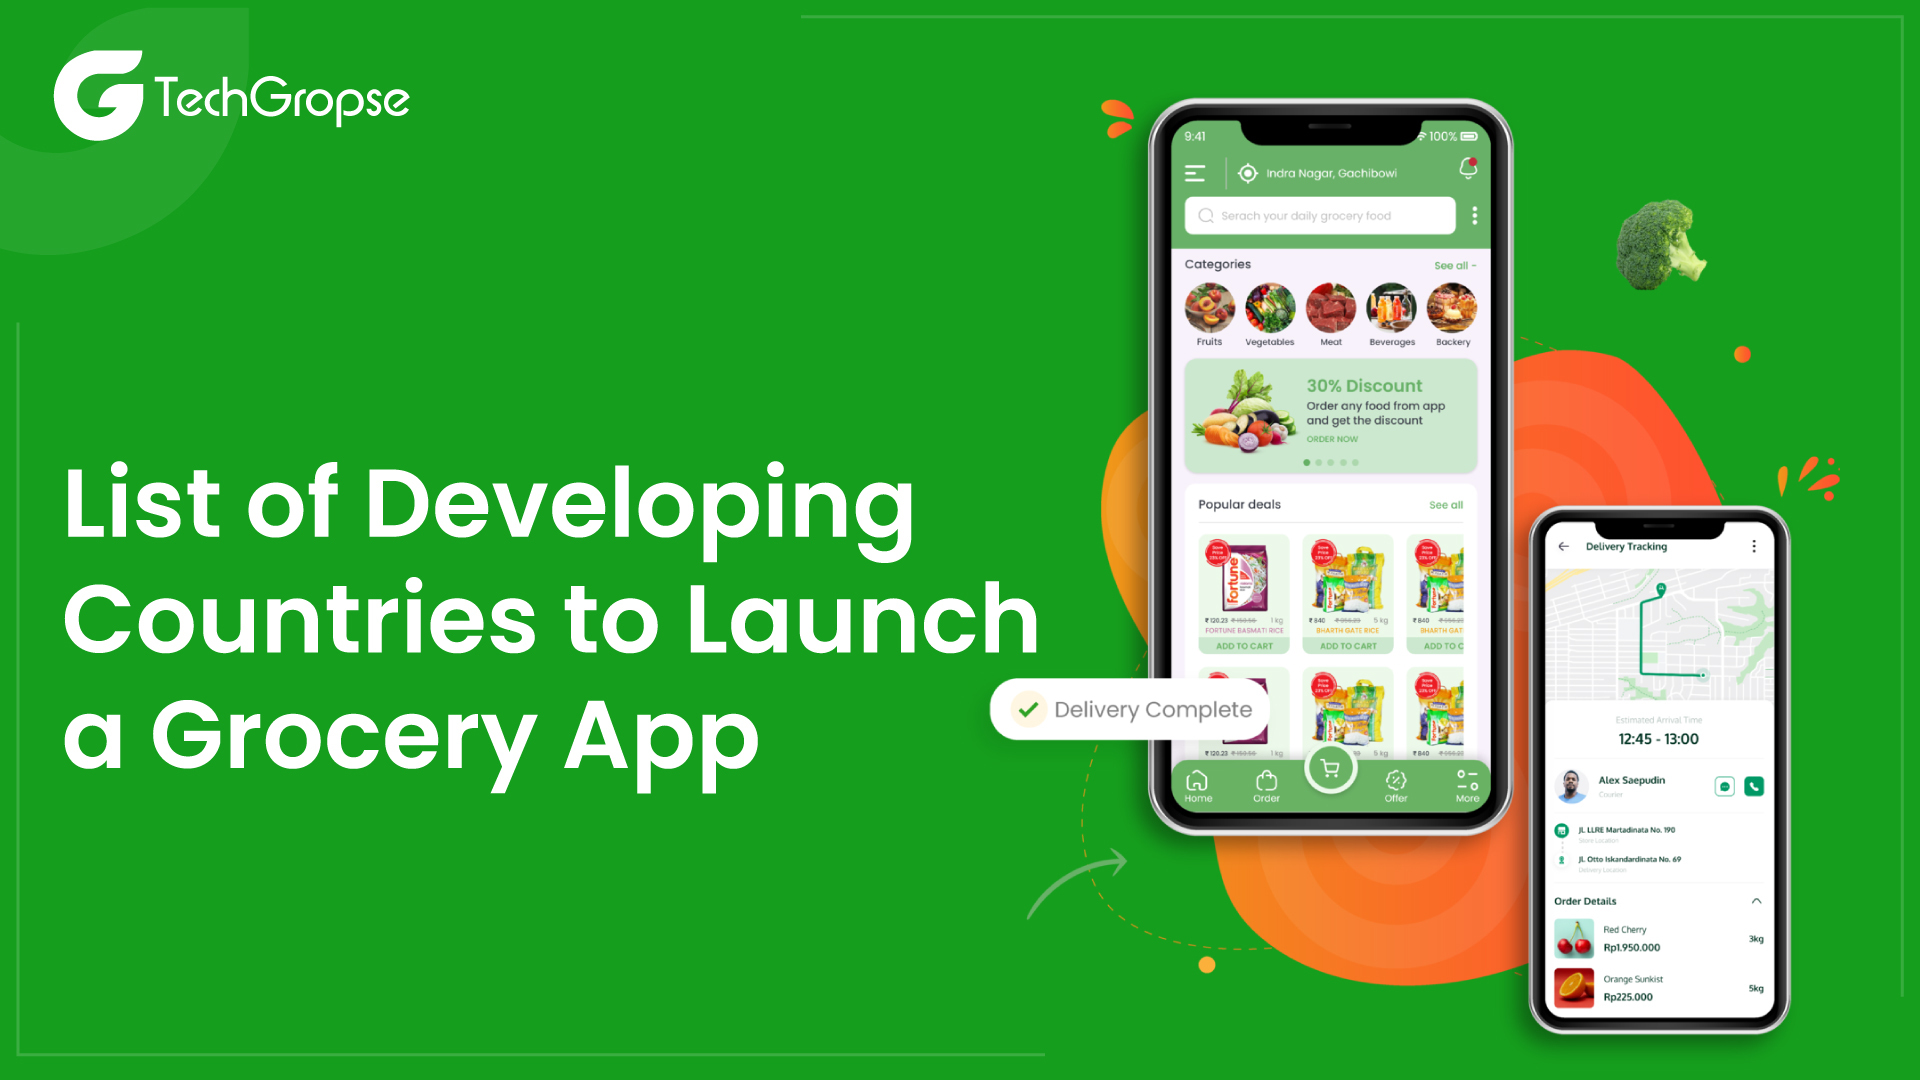 List of Developing Countries to Launch a Grocery App